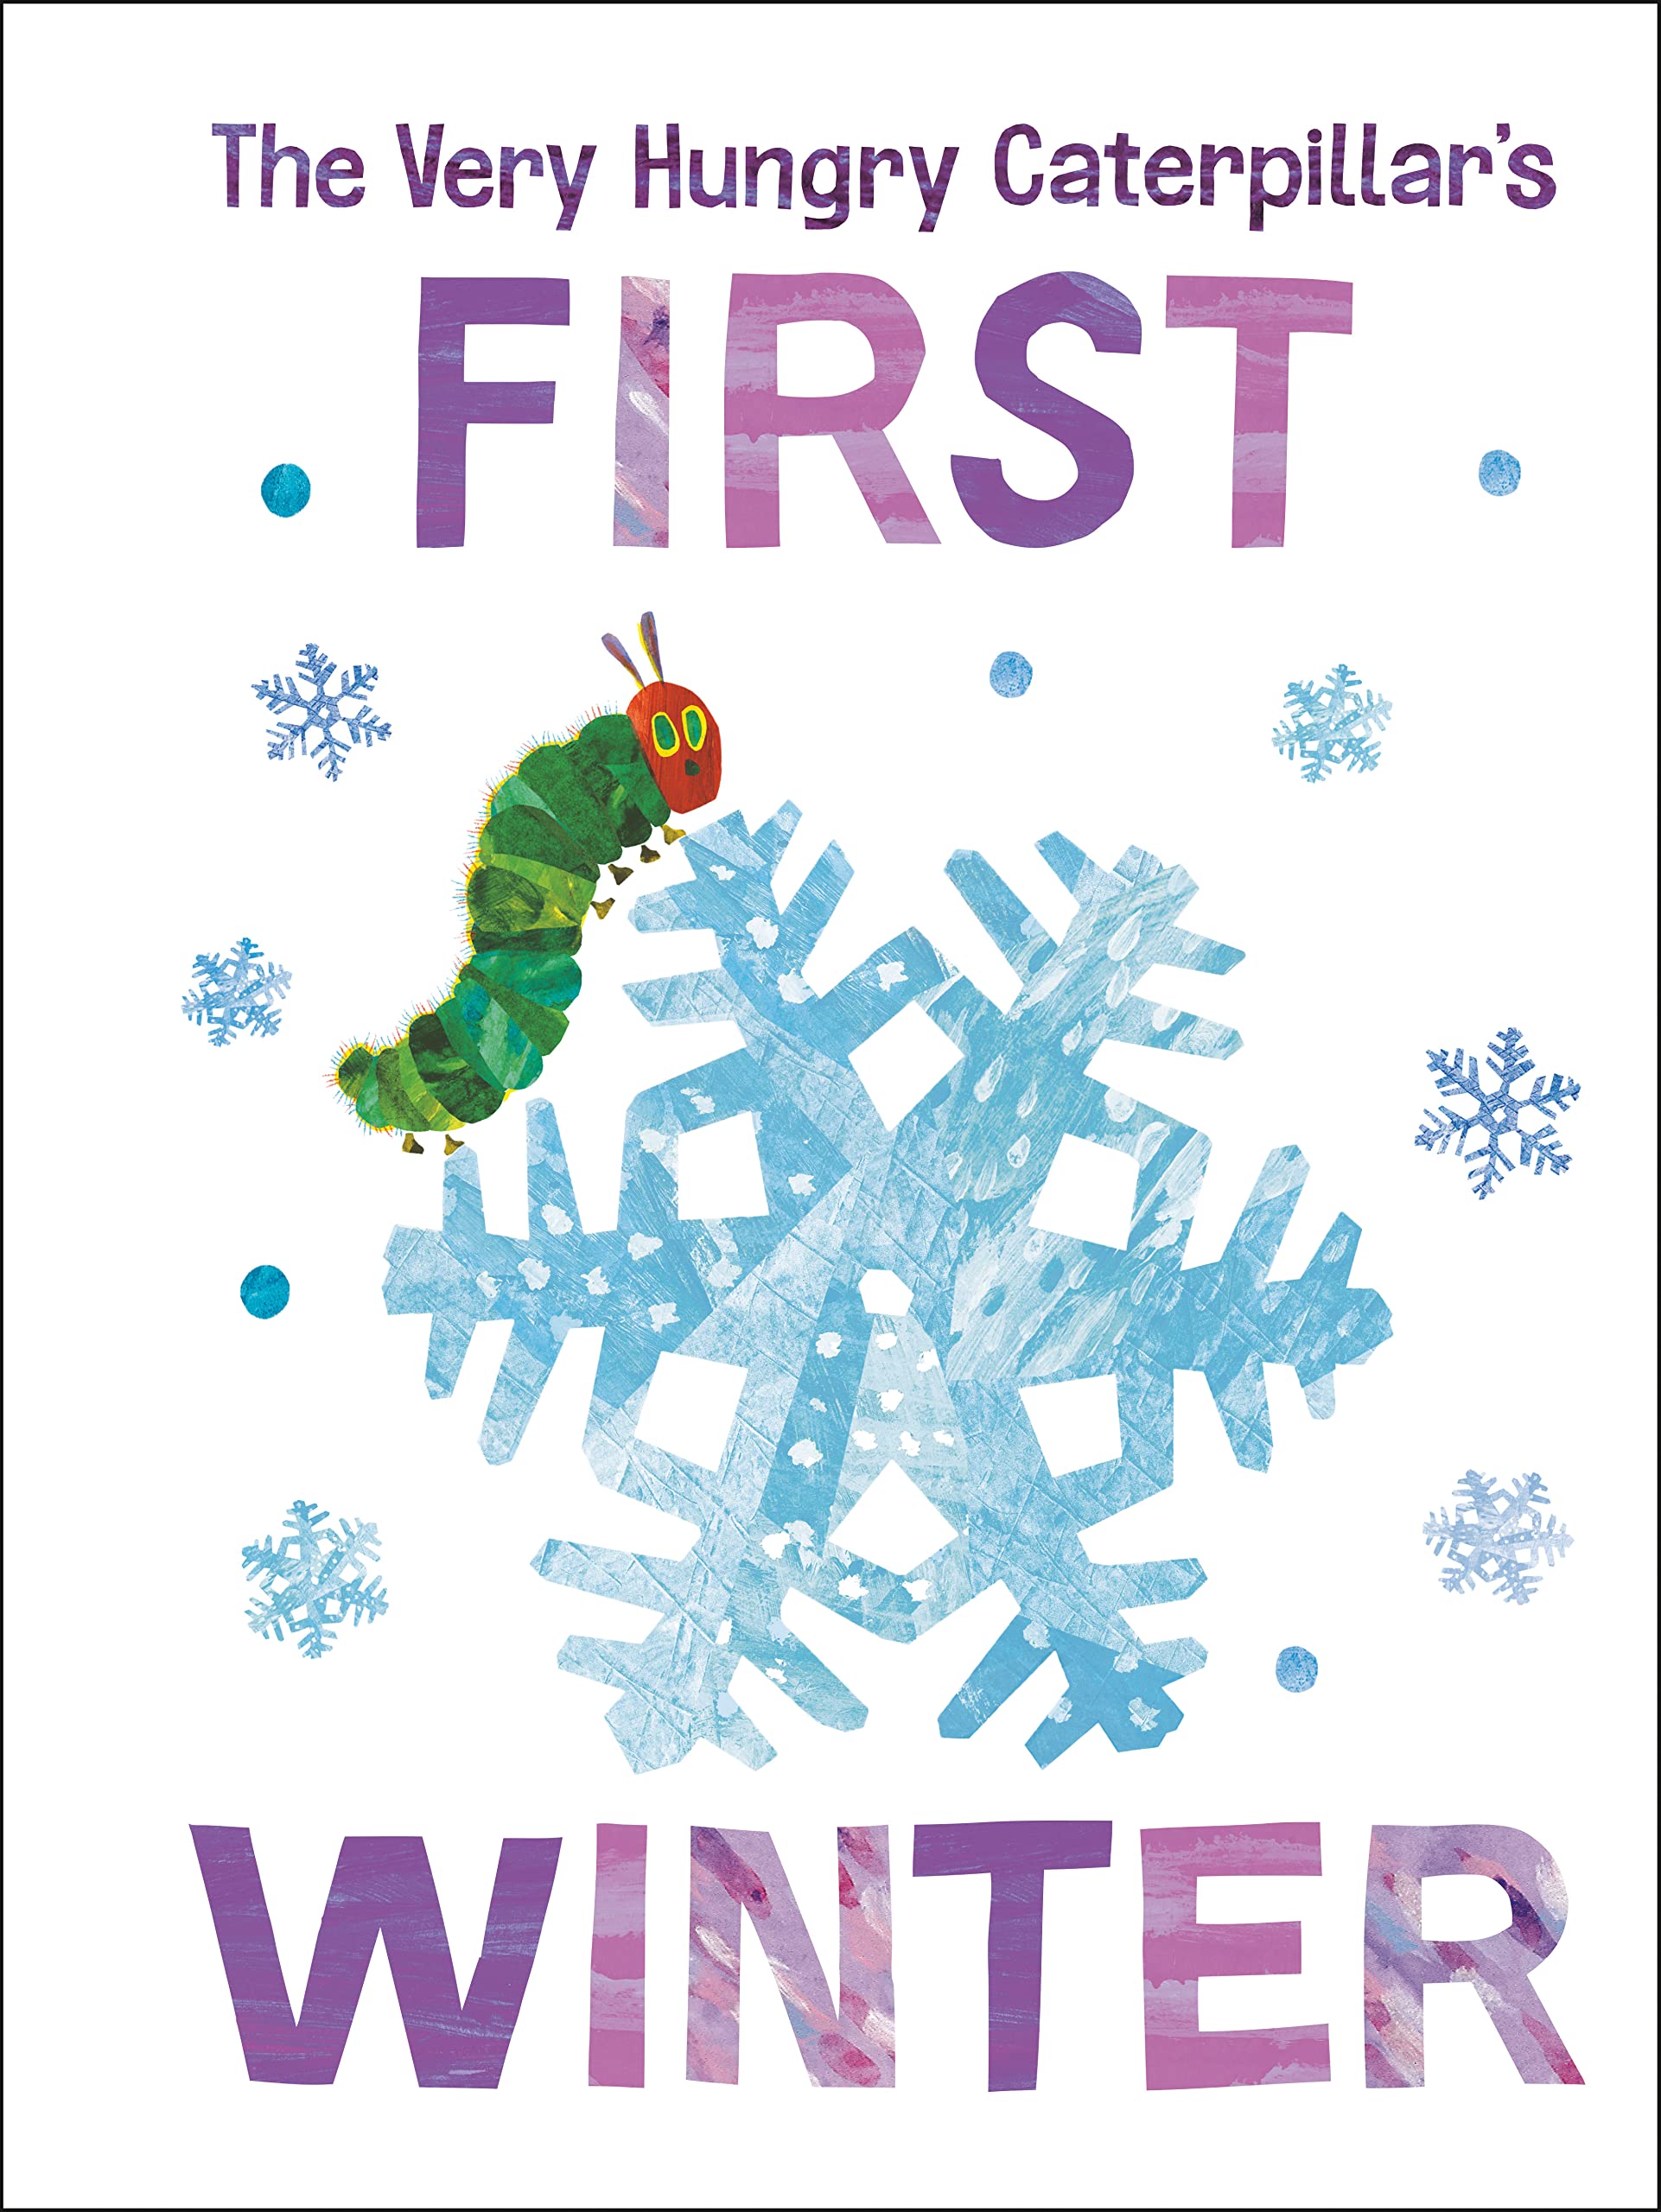 Image for "The Very Hungry Caterpillar's First Winter"